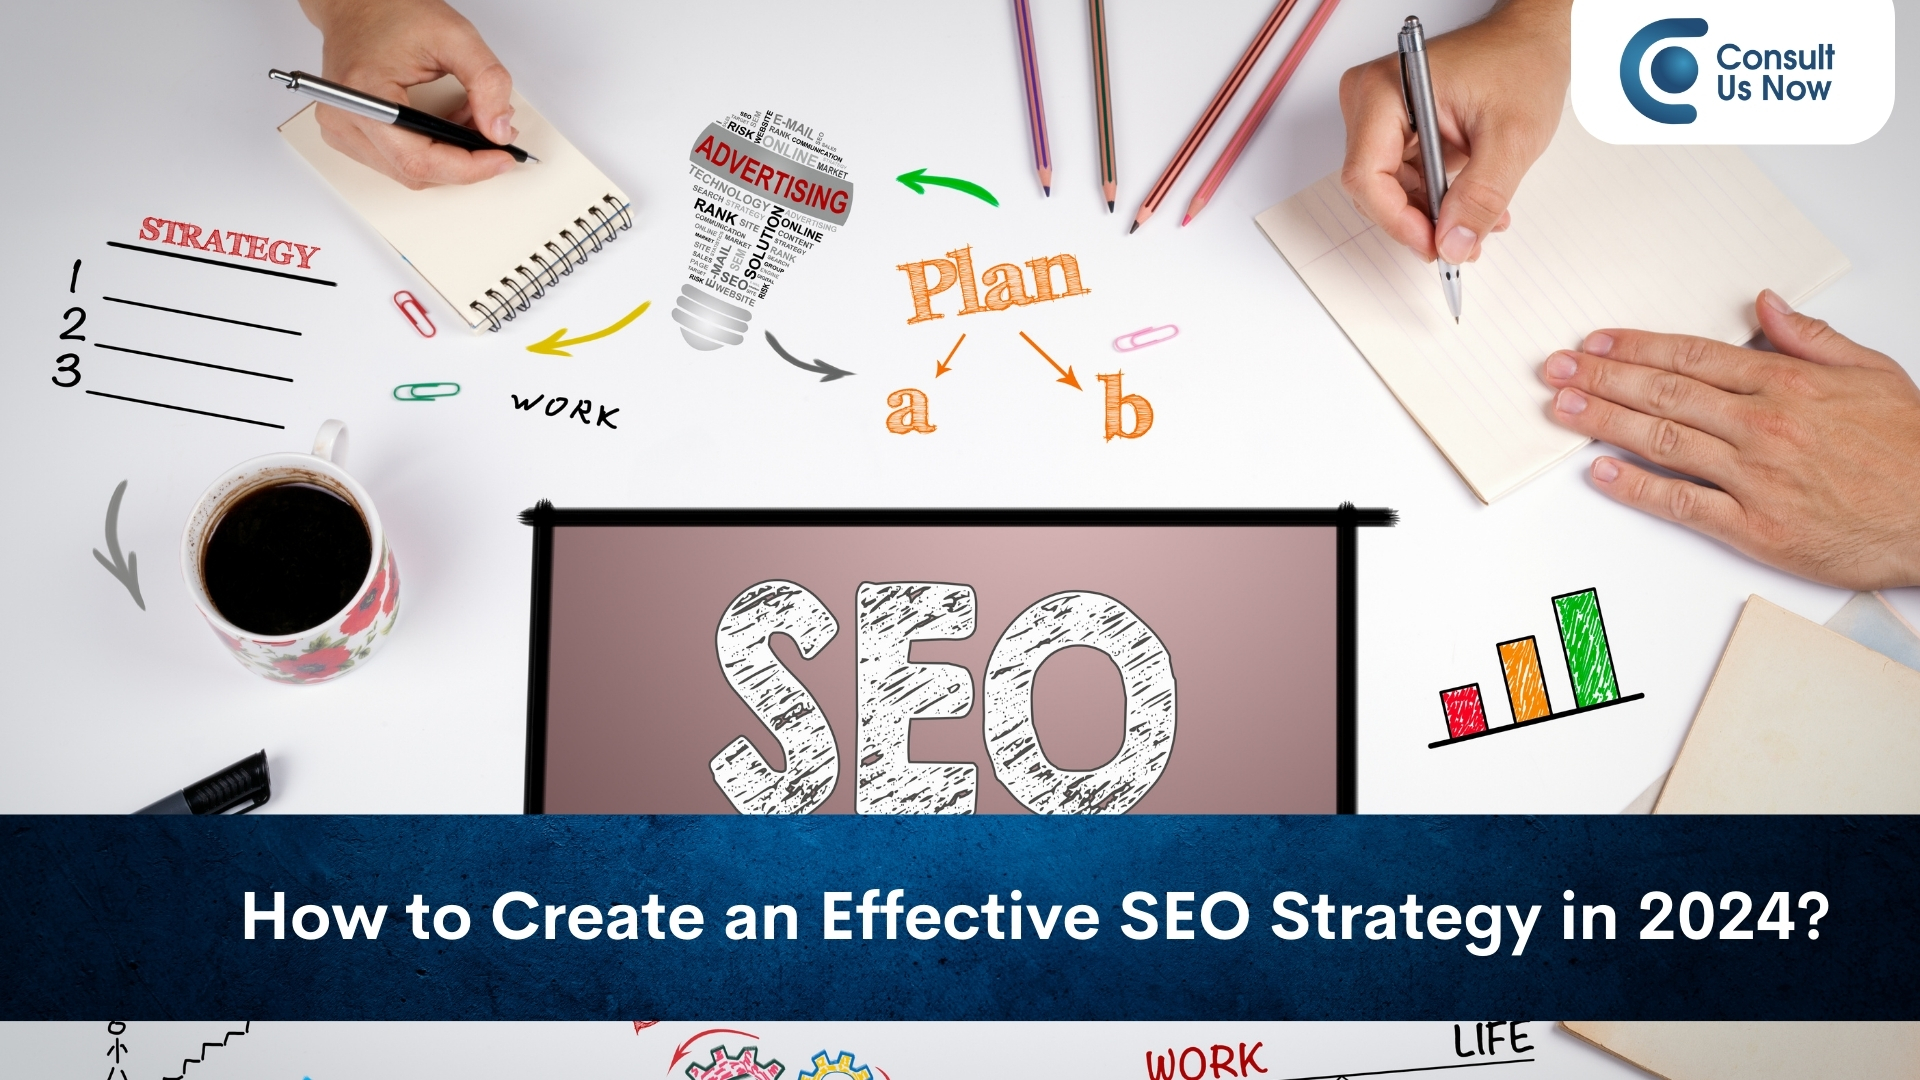 How to Create an Effective SEO Strategy in 2024?